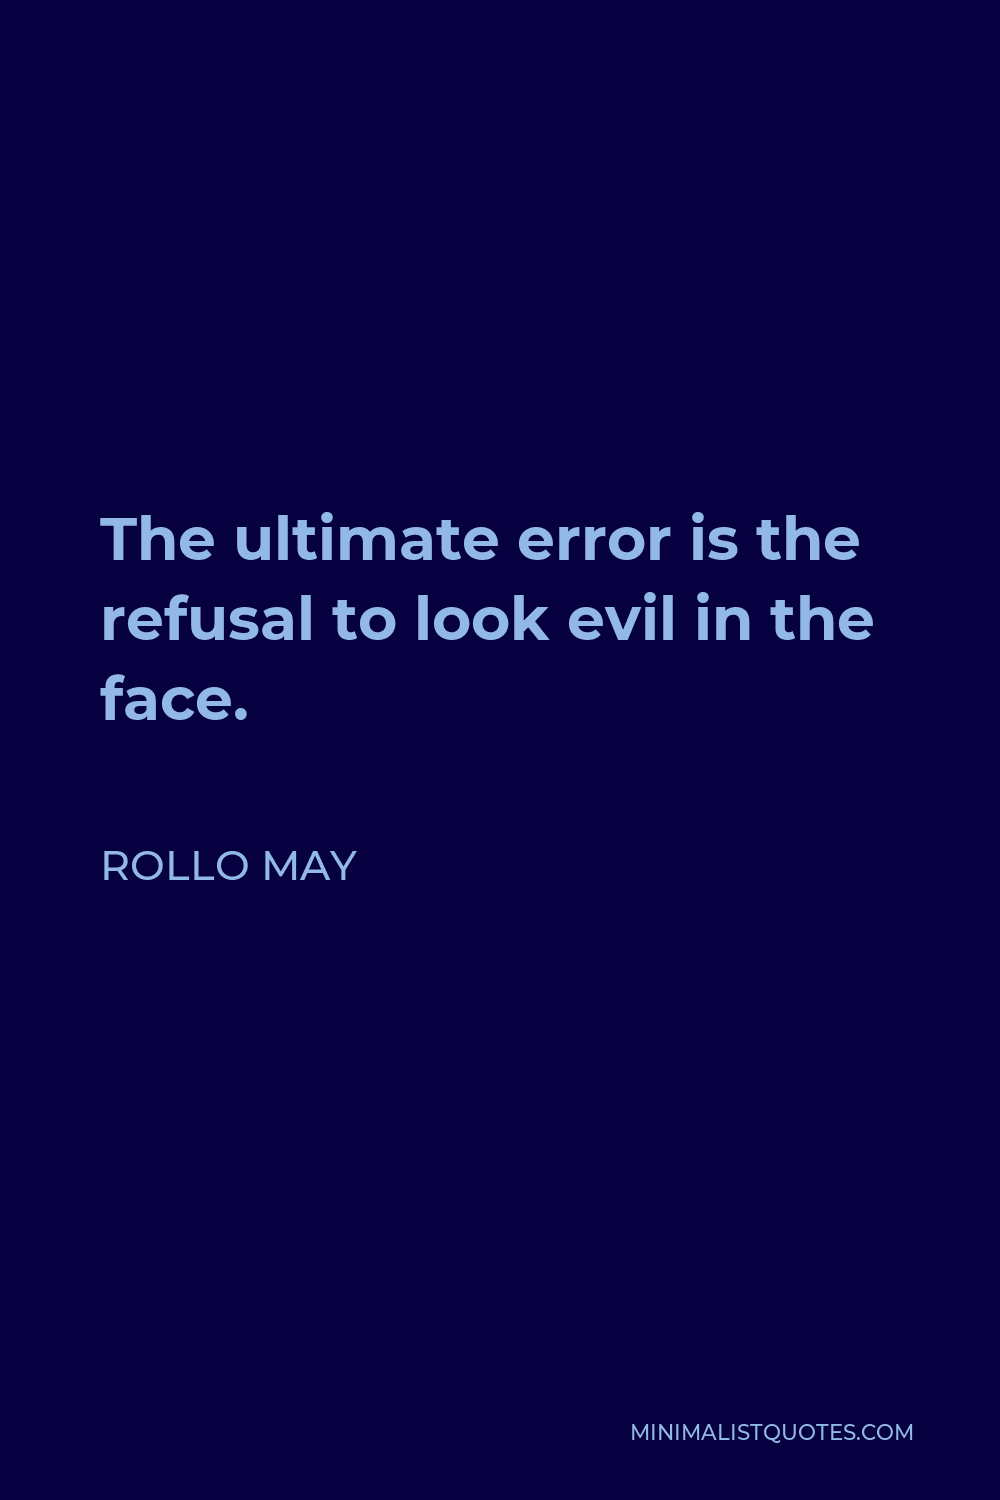 Rollo May Quote - The ultimate error is the refusal to look evil in the face.